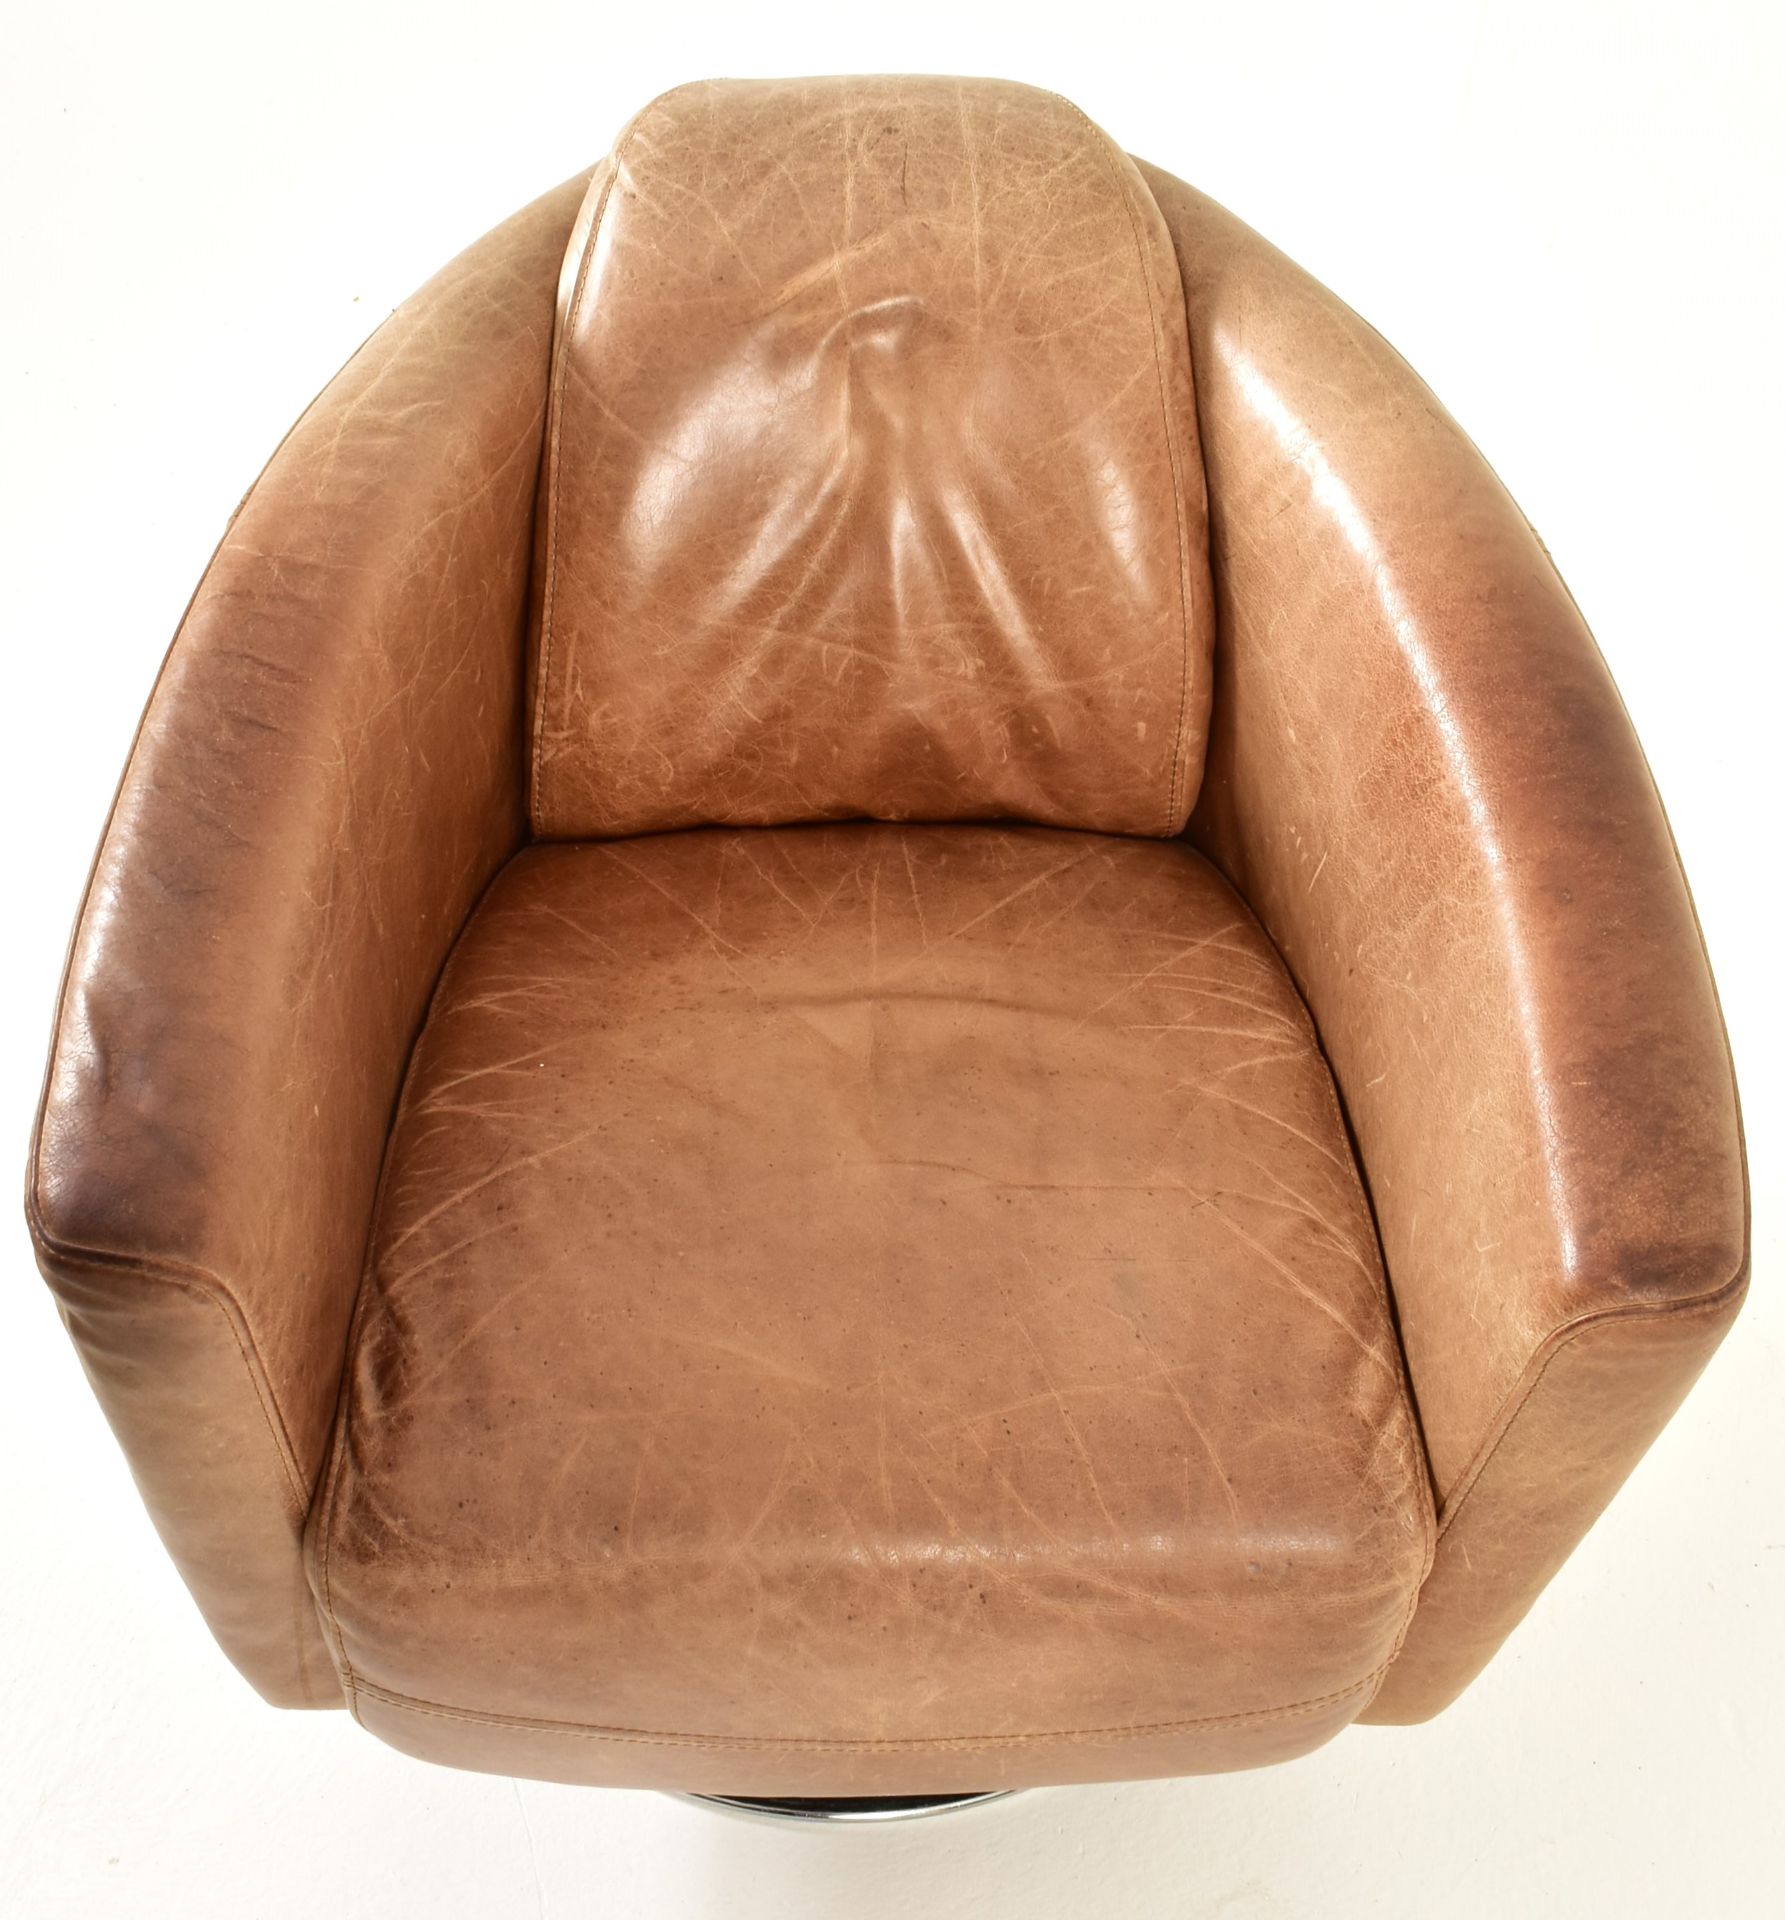 HALO - VINTAGE BROWN LEATHER AVIATOR TUB SWIVEL CHAIR - Image 2 of 4